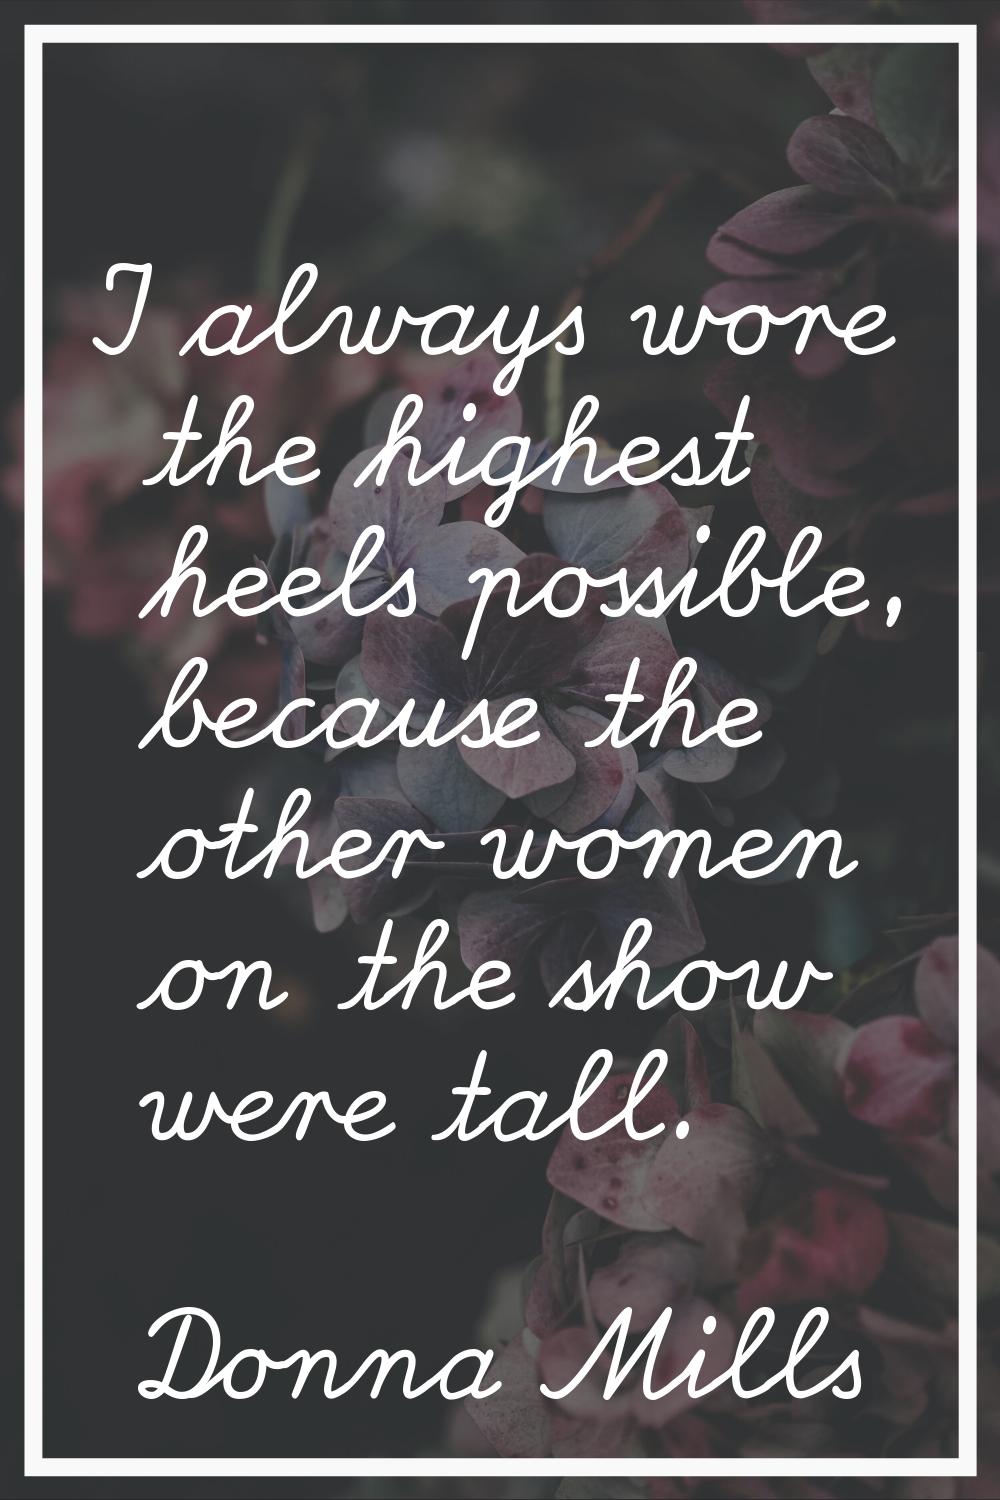 I always wore the highest heels possible, because the other women on the show were tall.